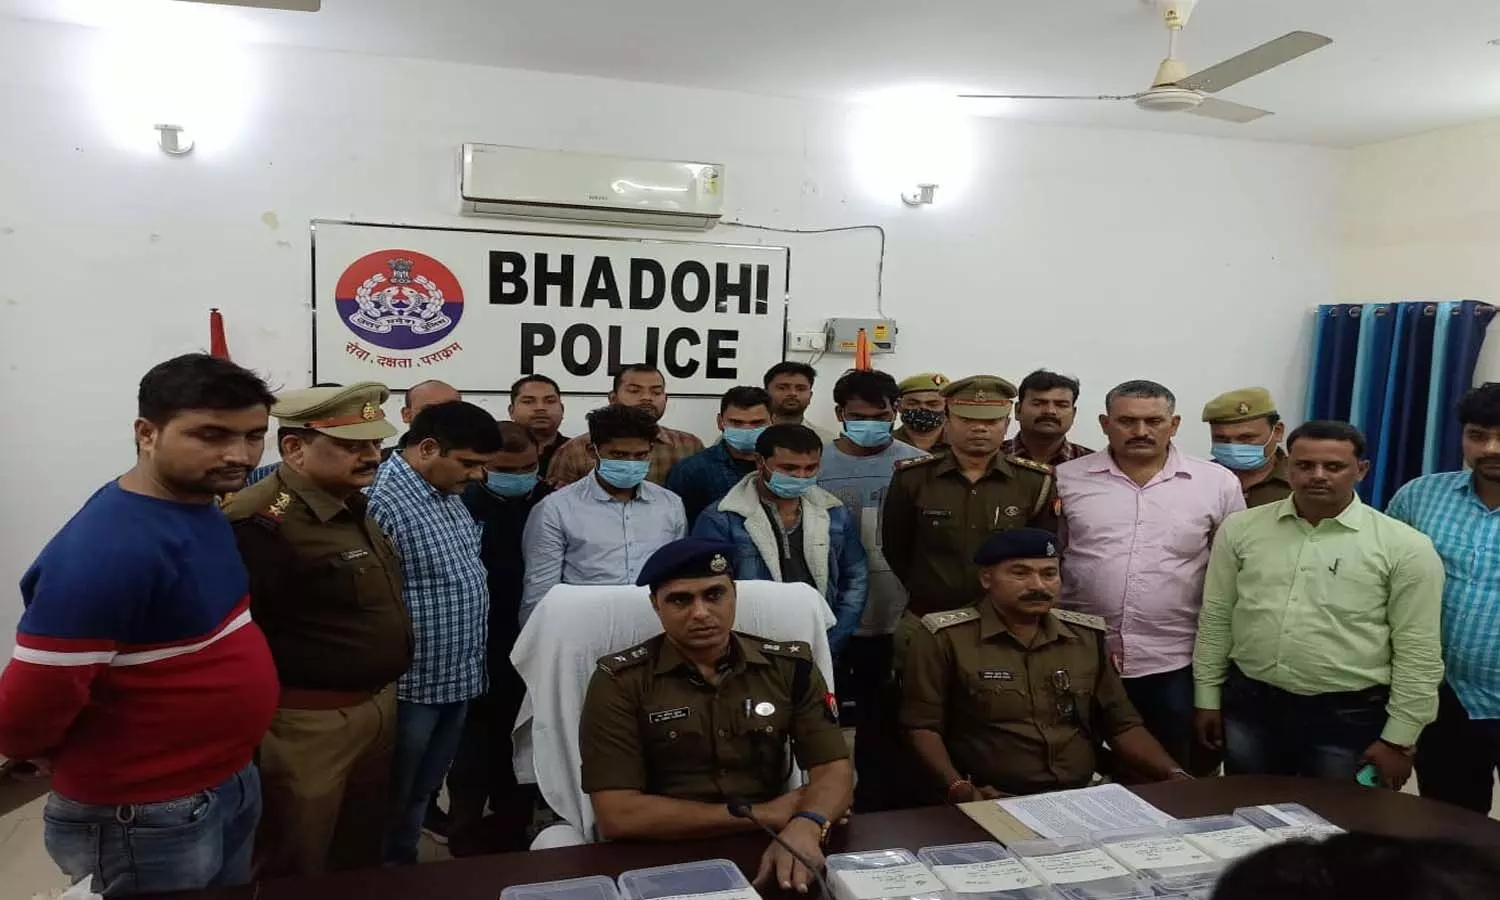 Bhadohi crime News: Five arrested including interstate ATM fraud gang leader, will be shocked to see the recovery